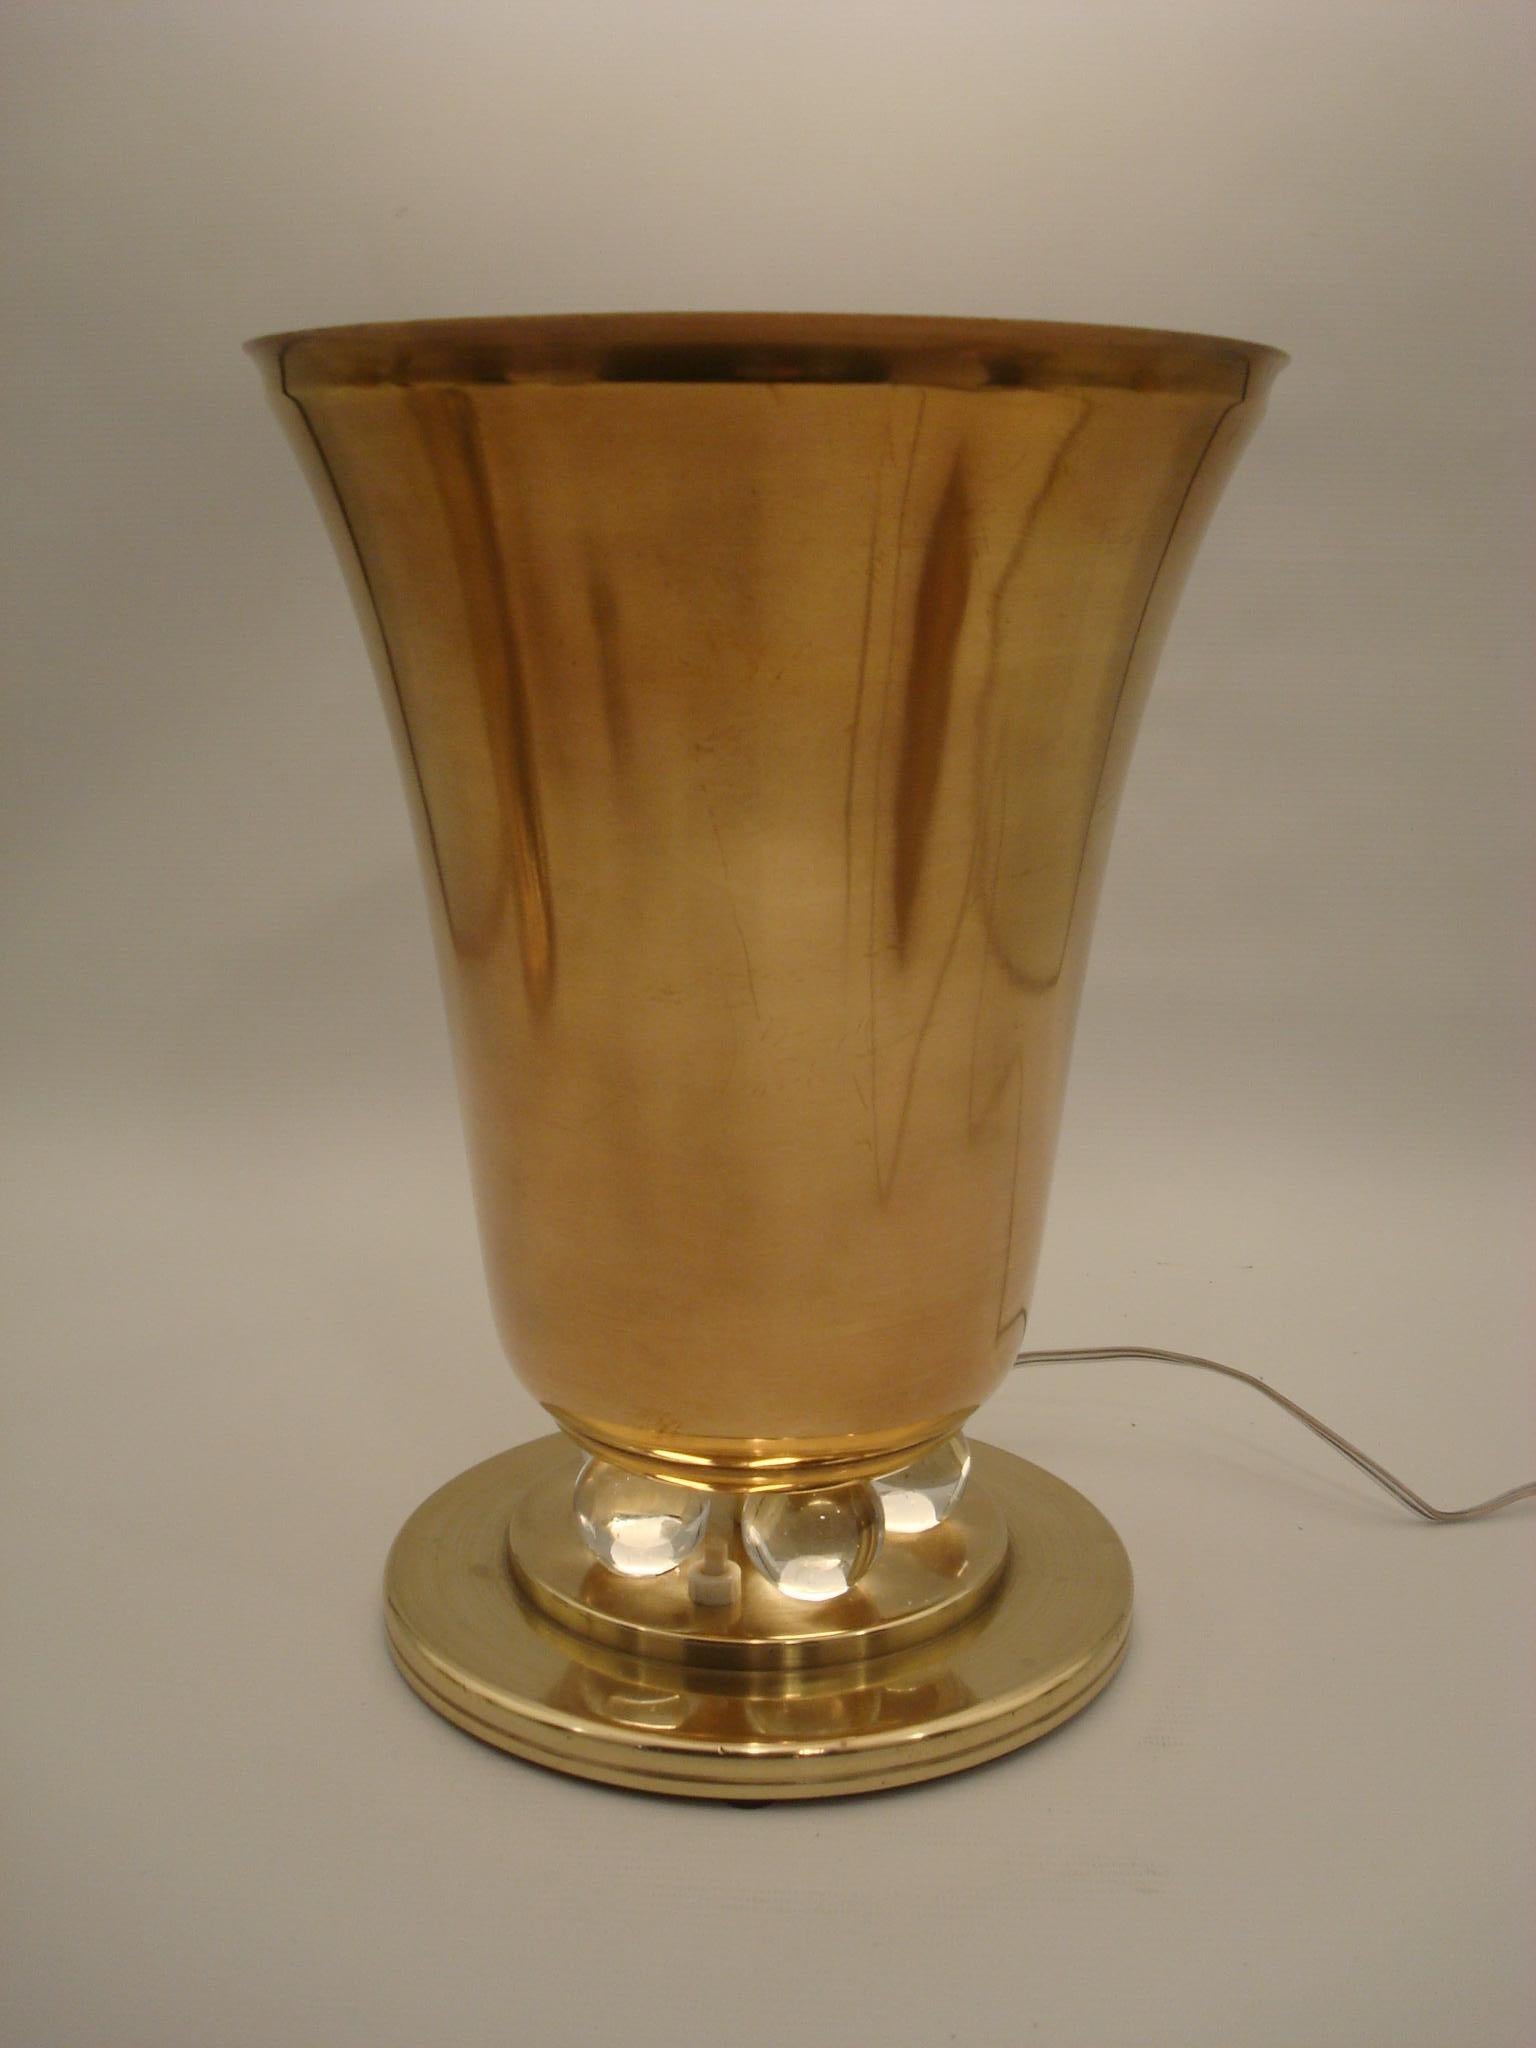 Art Deco Uplight Brass Metal Table Lamp, French, 1930s For Sale 8